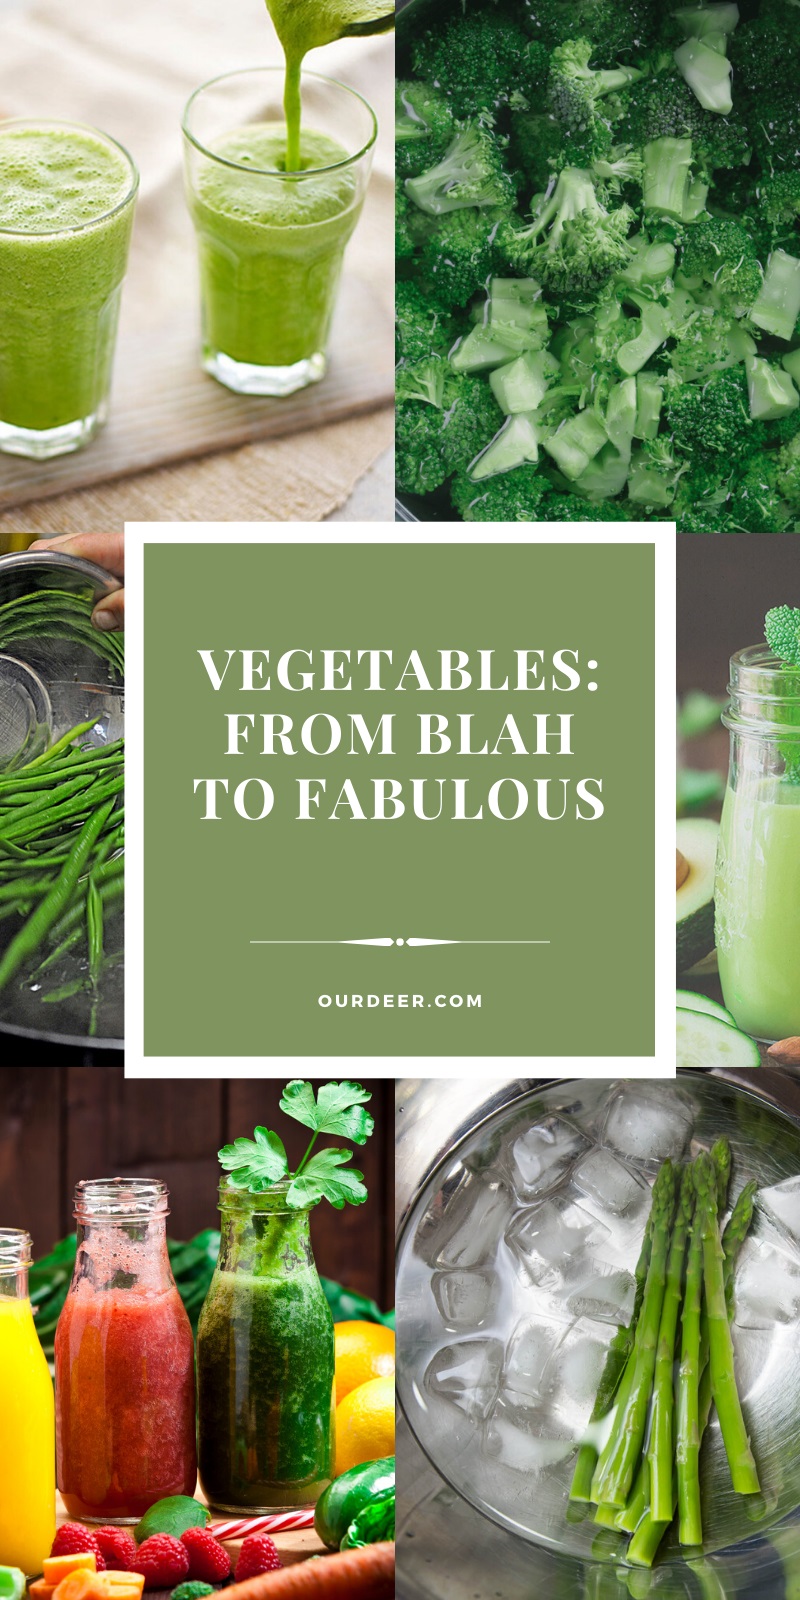 Vegetables: From Blah to Fabulous